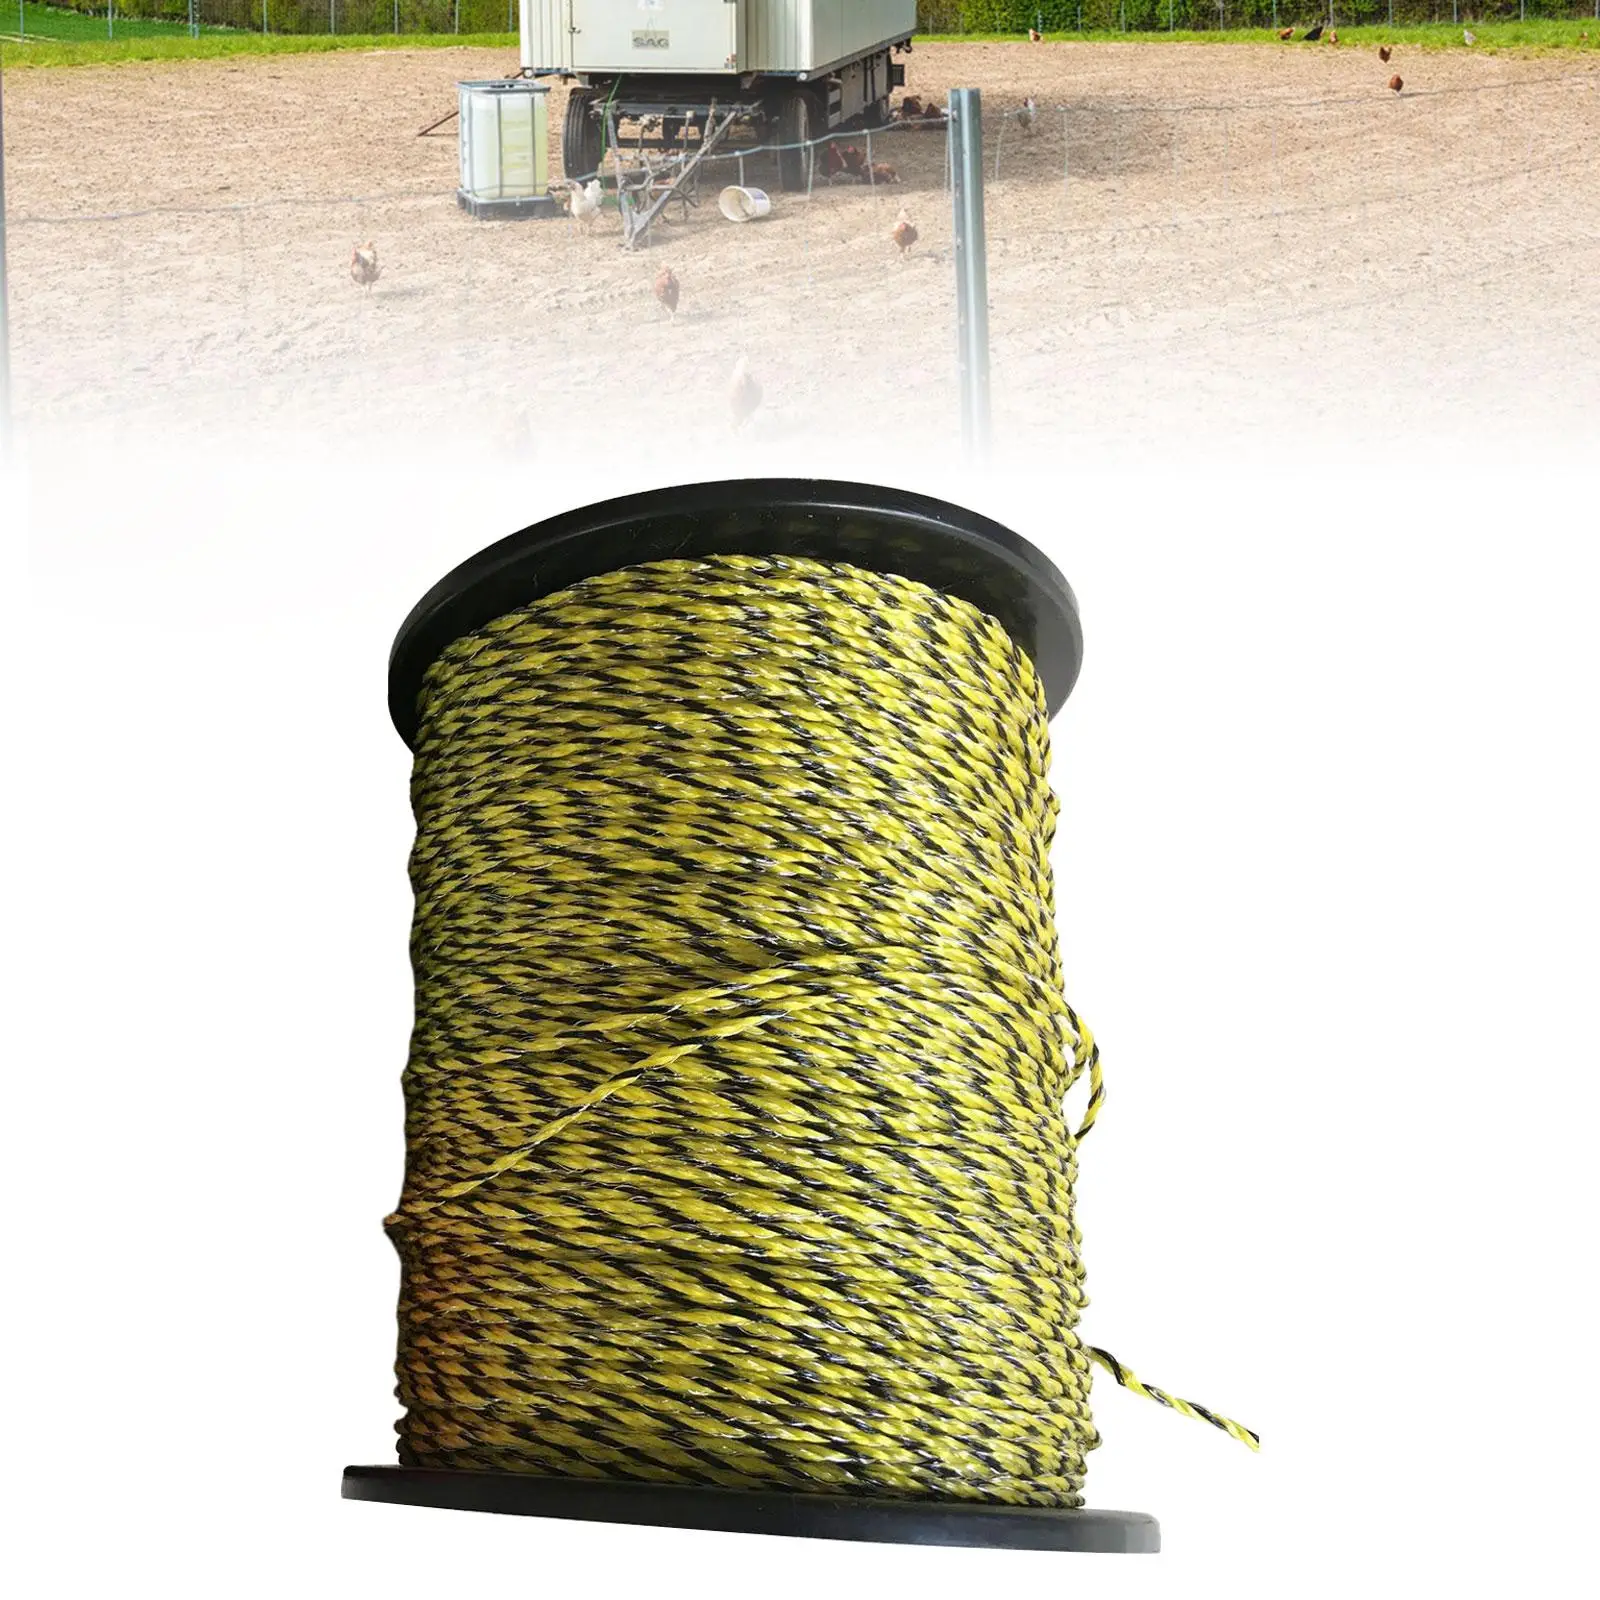 Fence Polywire Cattle Rustproof Upgraded Conductive Animal 1 Roll Wire